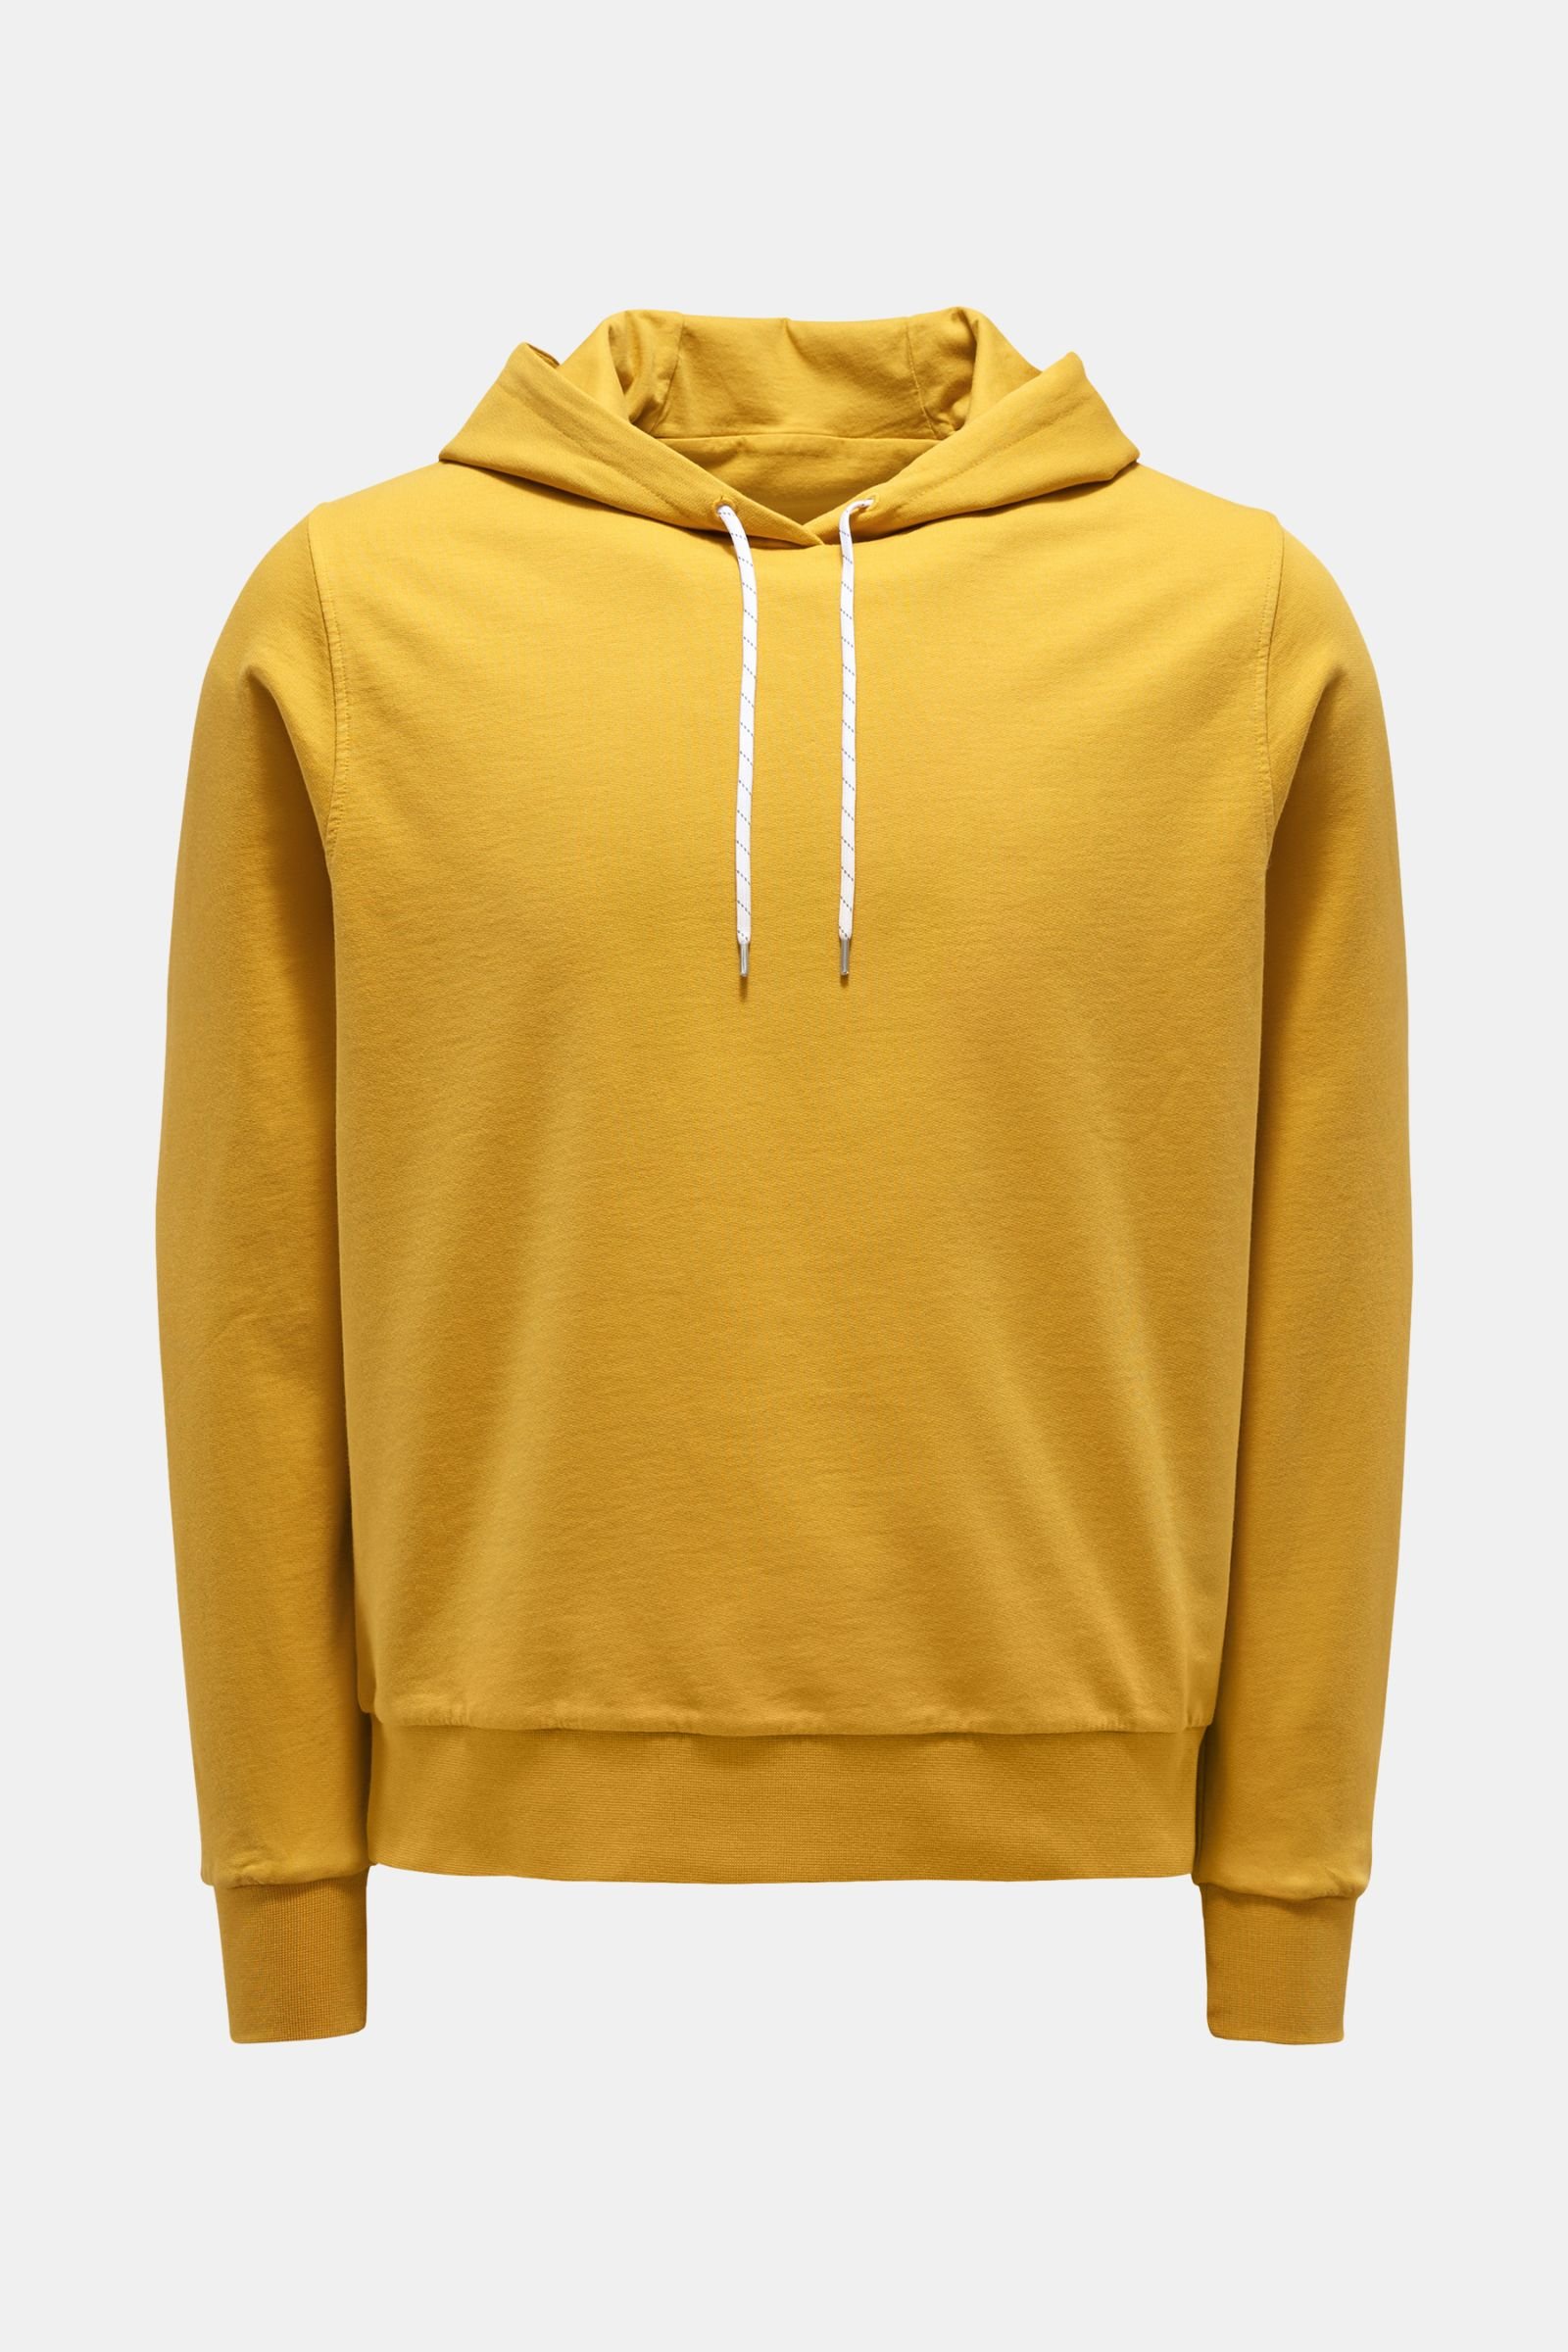 Reversible-hooded jumper yellow